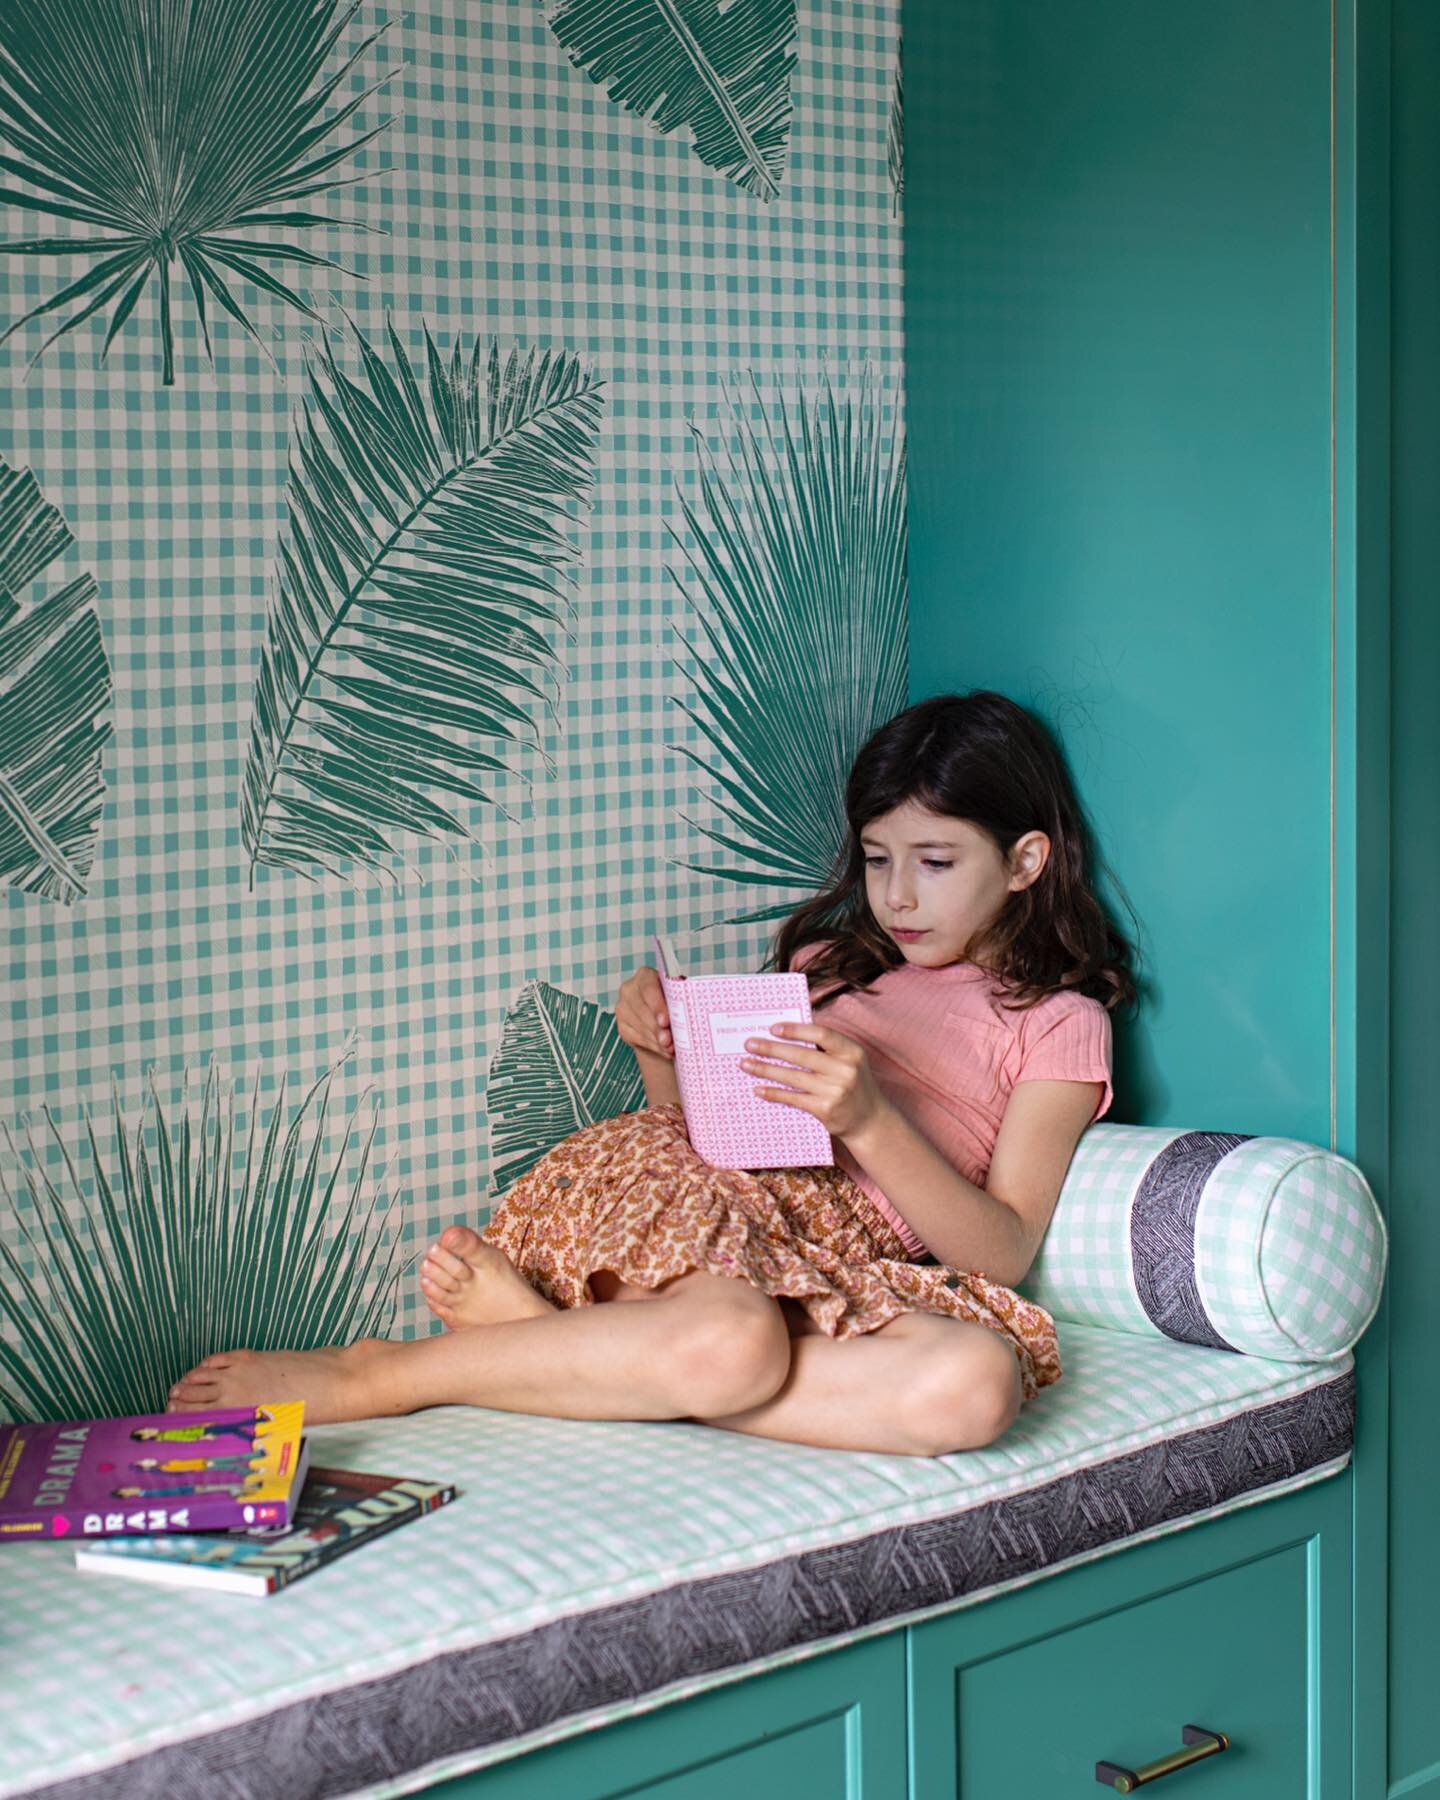 Sweetest reading nook for the sweetest little client (and Melissa&rsquo;s mini me!). Thank you for capturing her in her element @karynmillet @krushimag 

Wallpaper and fabric @kranehome